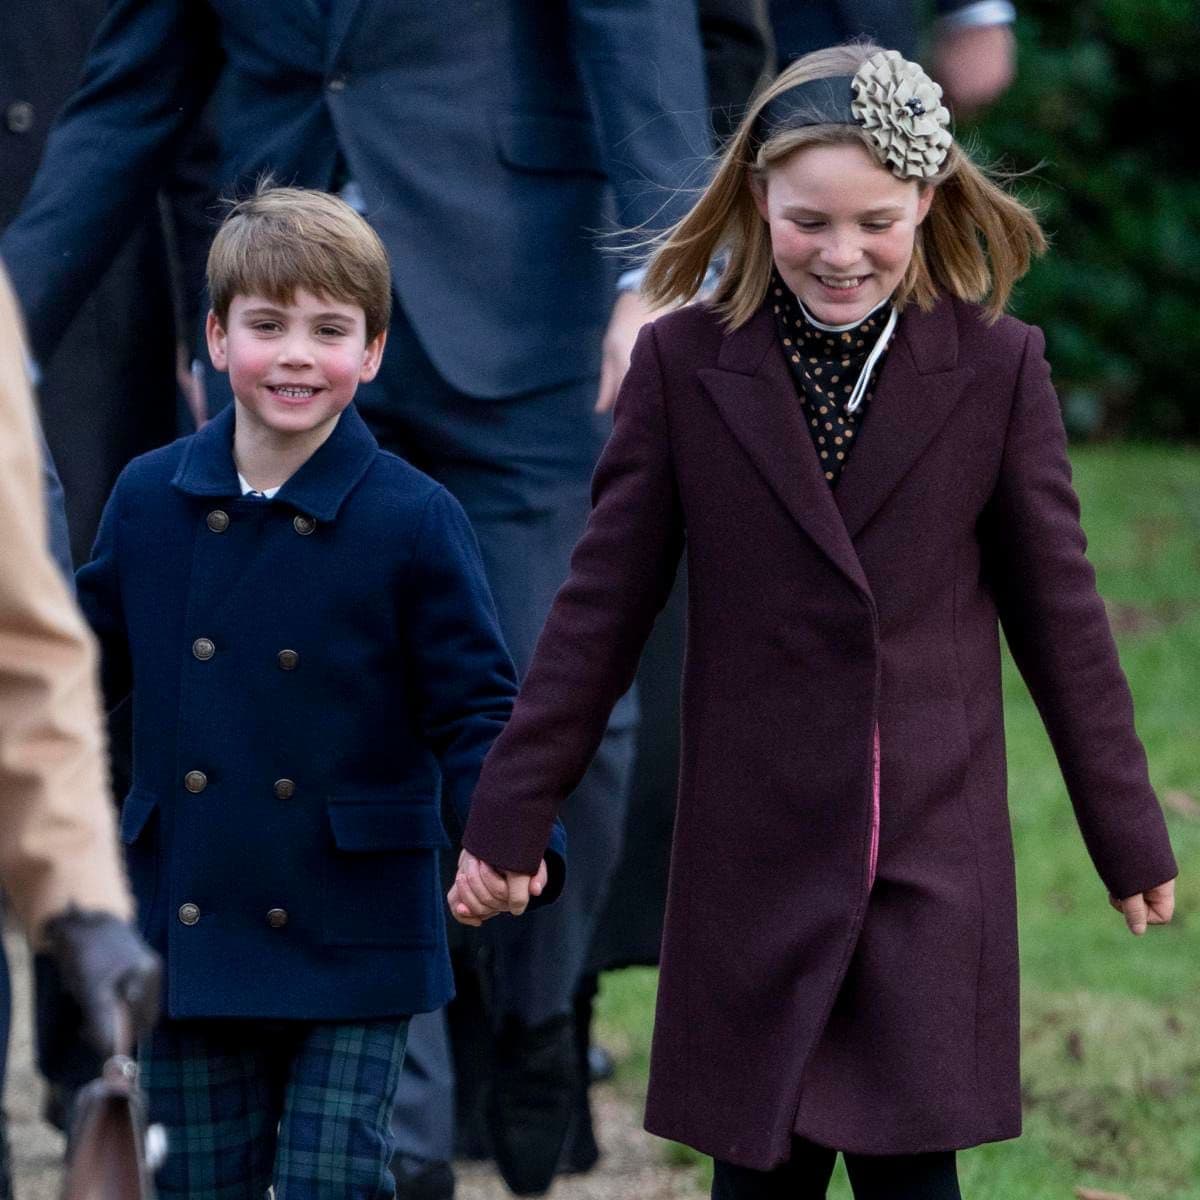 Prince Louis adorably held hands with Mia Tindall, daughter of Prince William's cousin Zara Tindall.